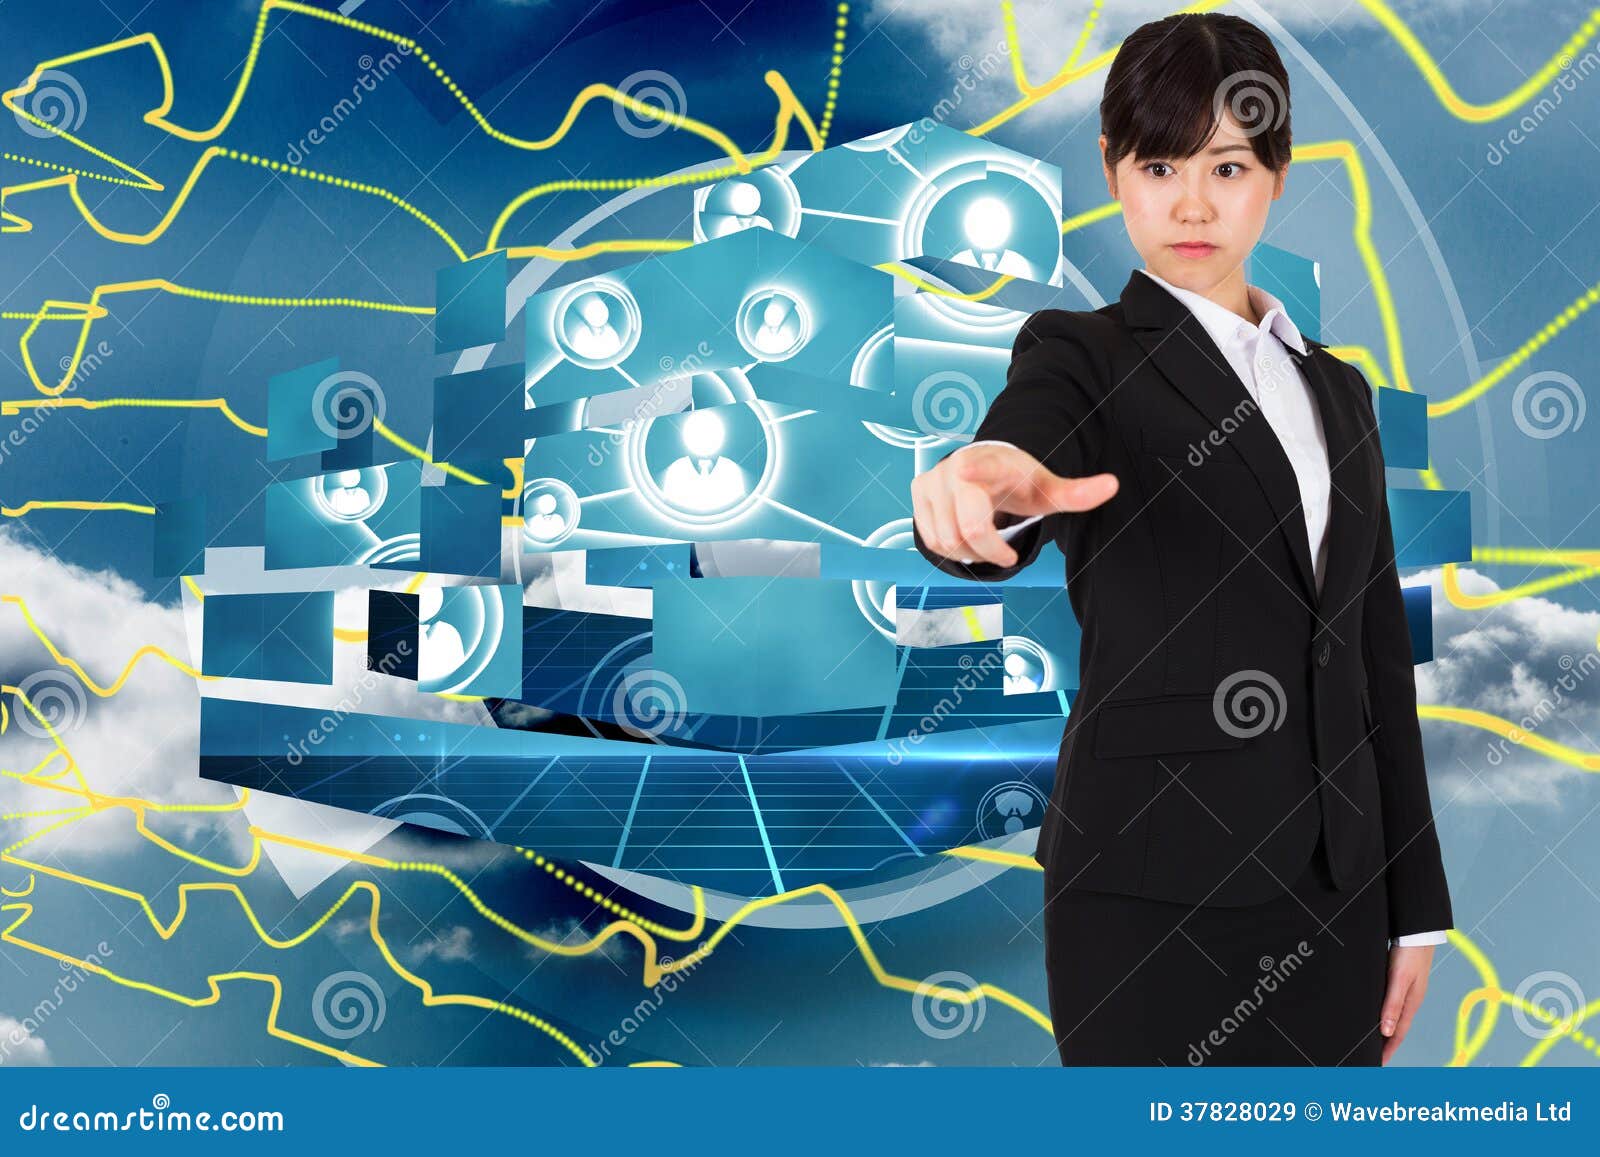 composite image of focused businesswoman pointing